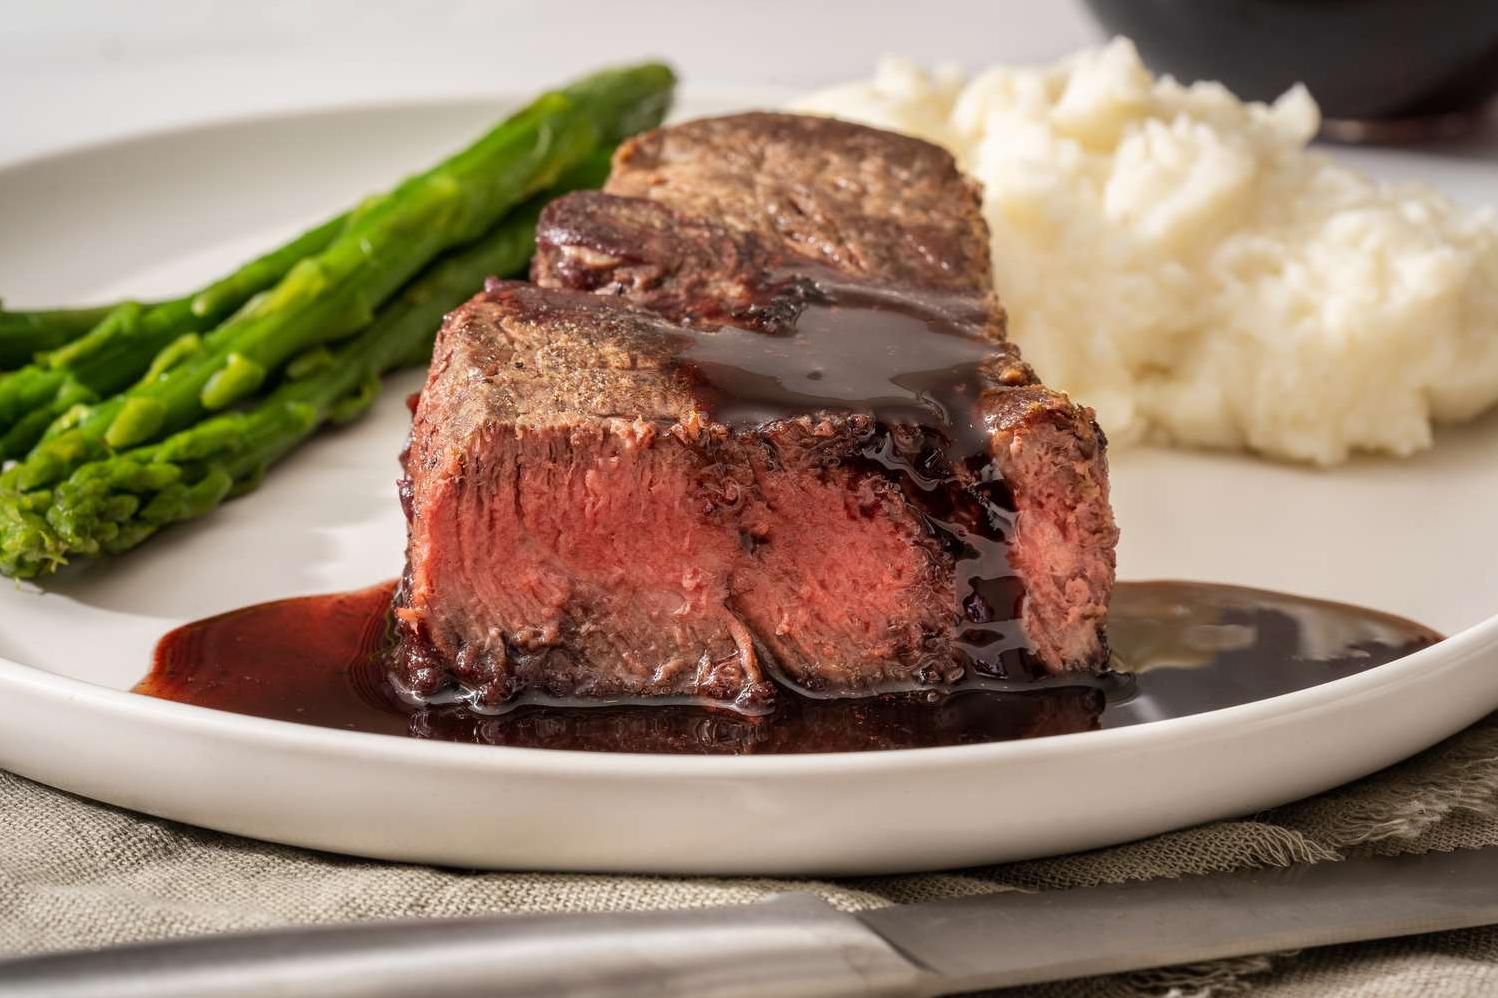  A succulent cut of filet mignon, cooked to perfection.